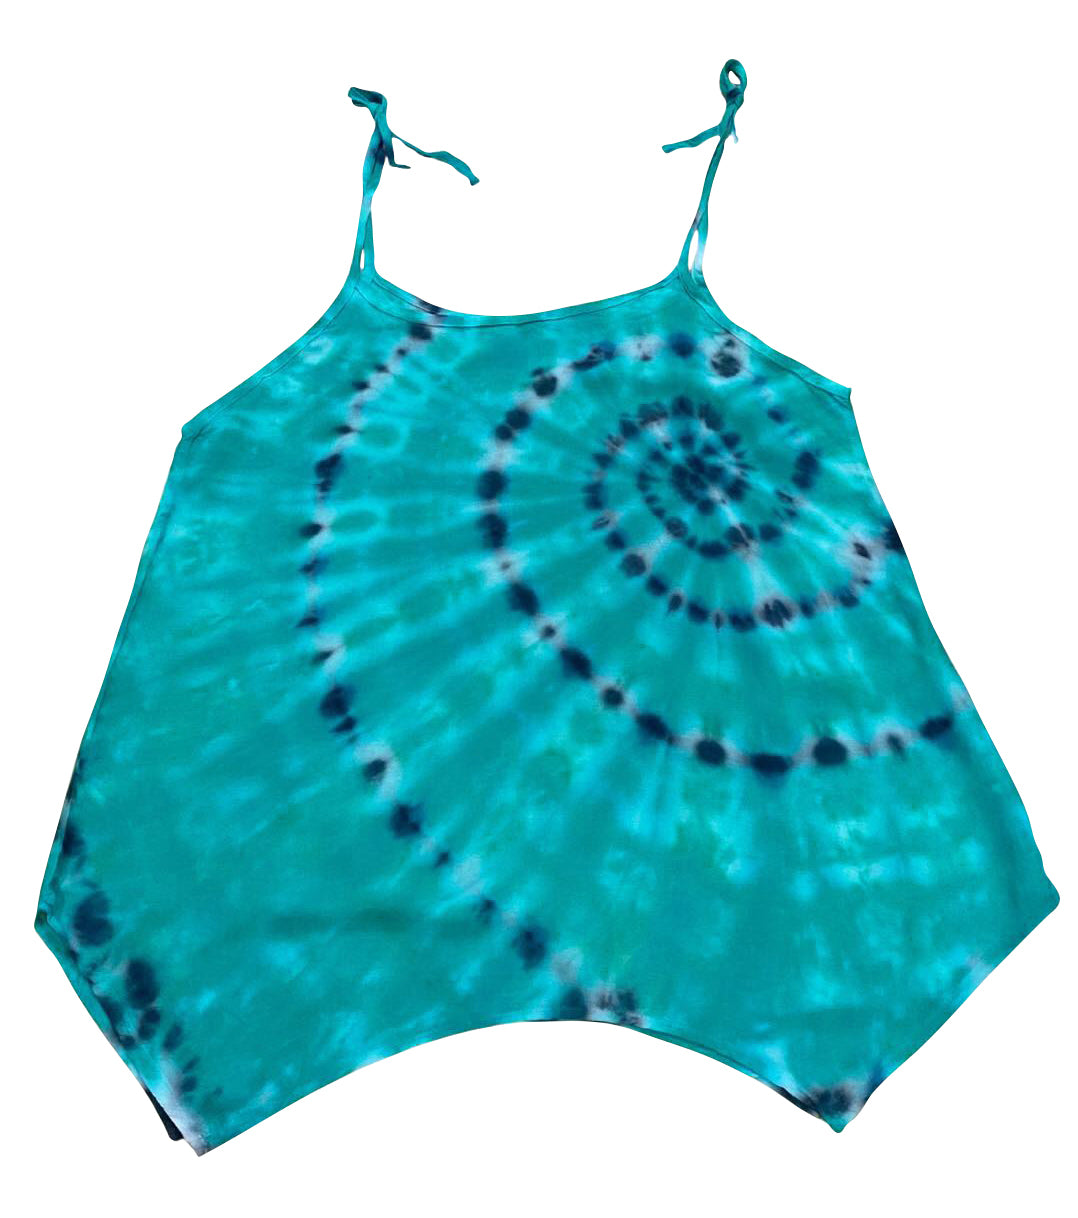 Cami Camisole Teen & Women, One Size Free Size Fit 0 to 8, Handmade Tie Dyed - Teal Turquoise